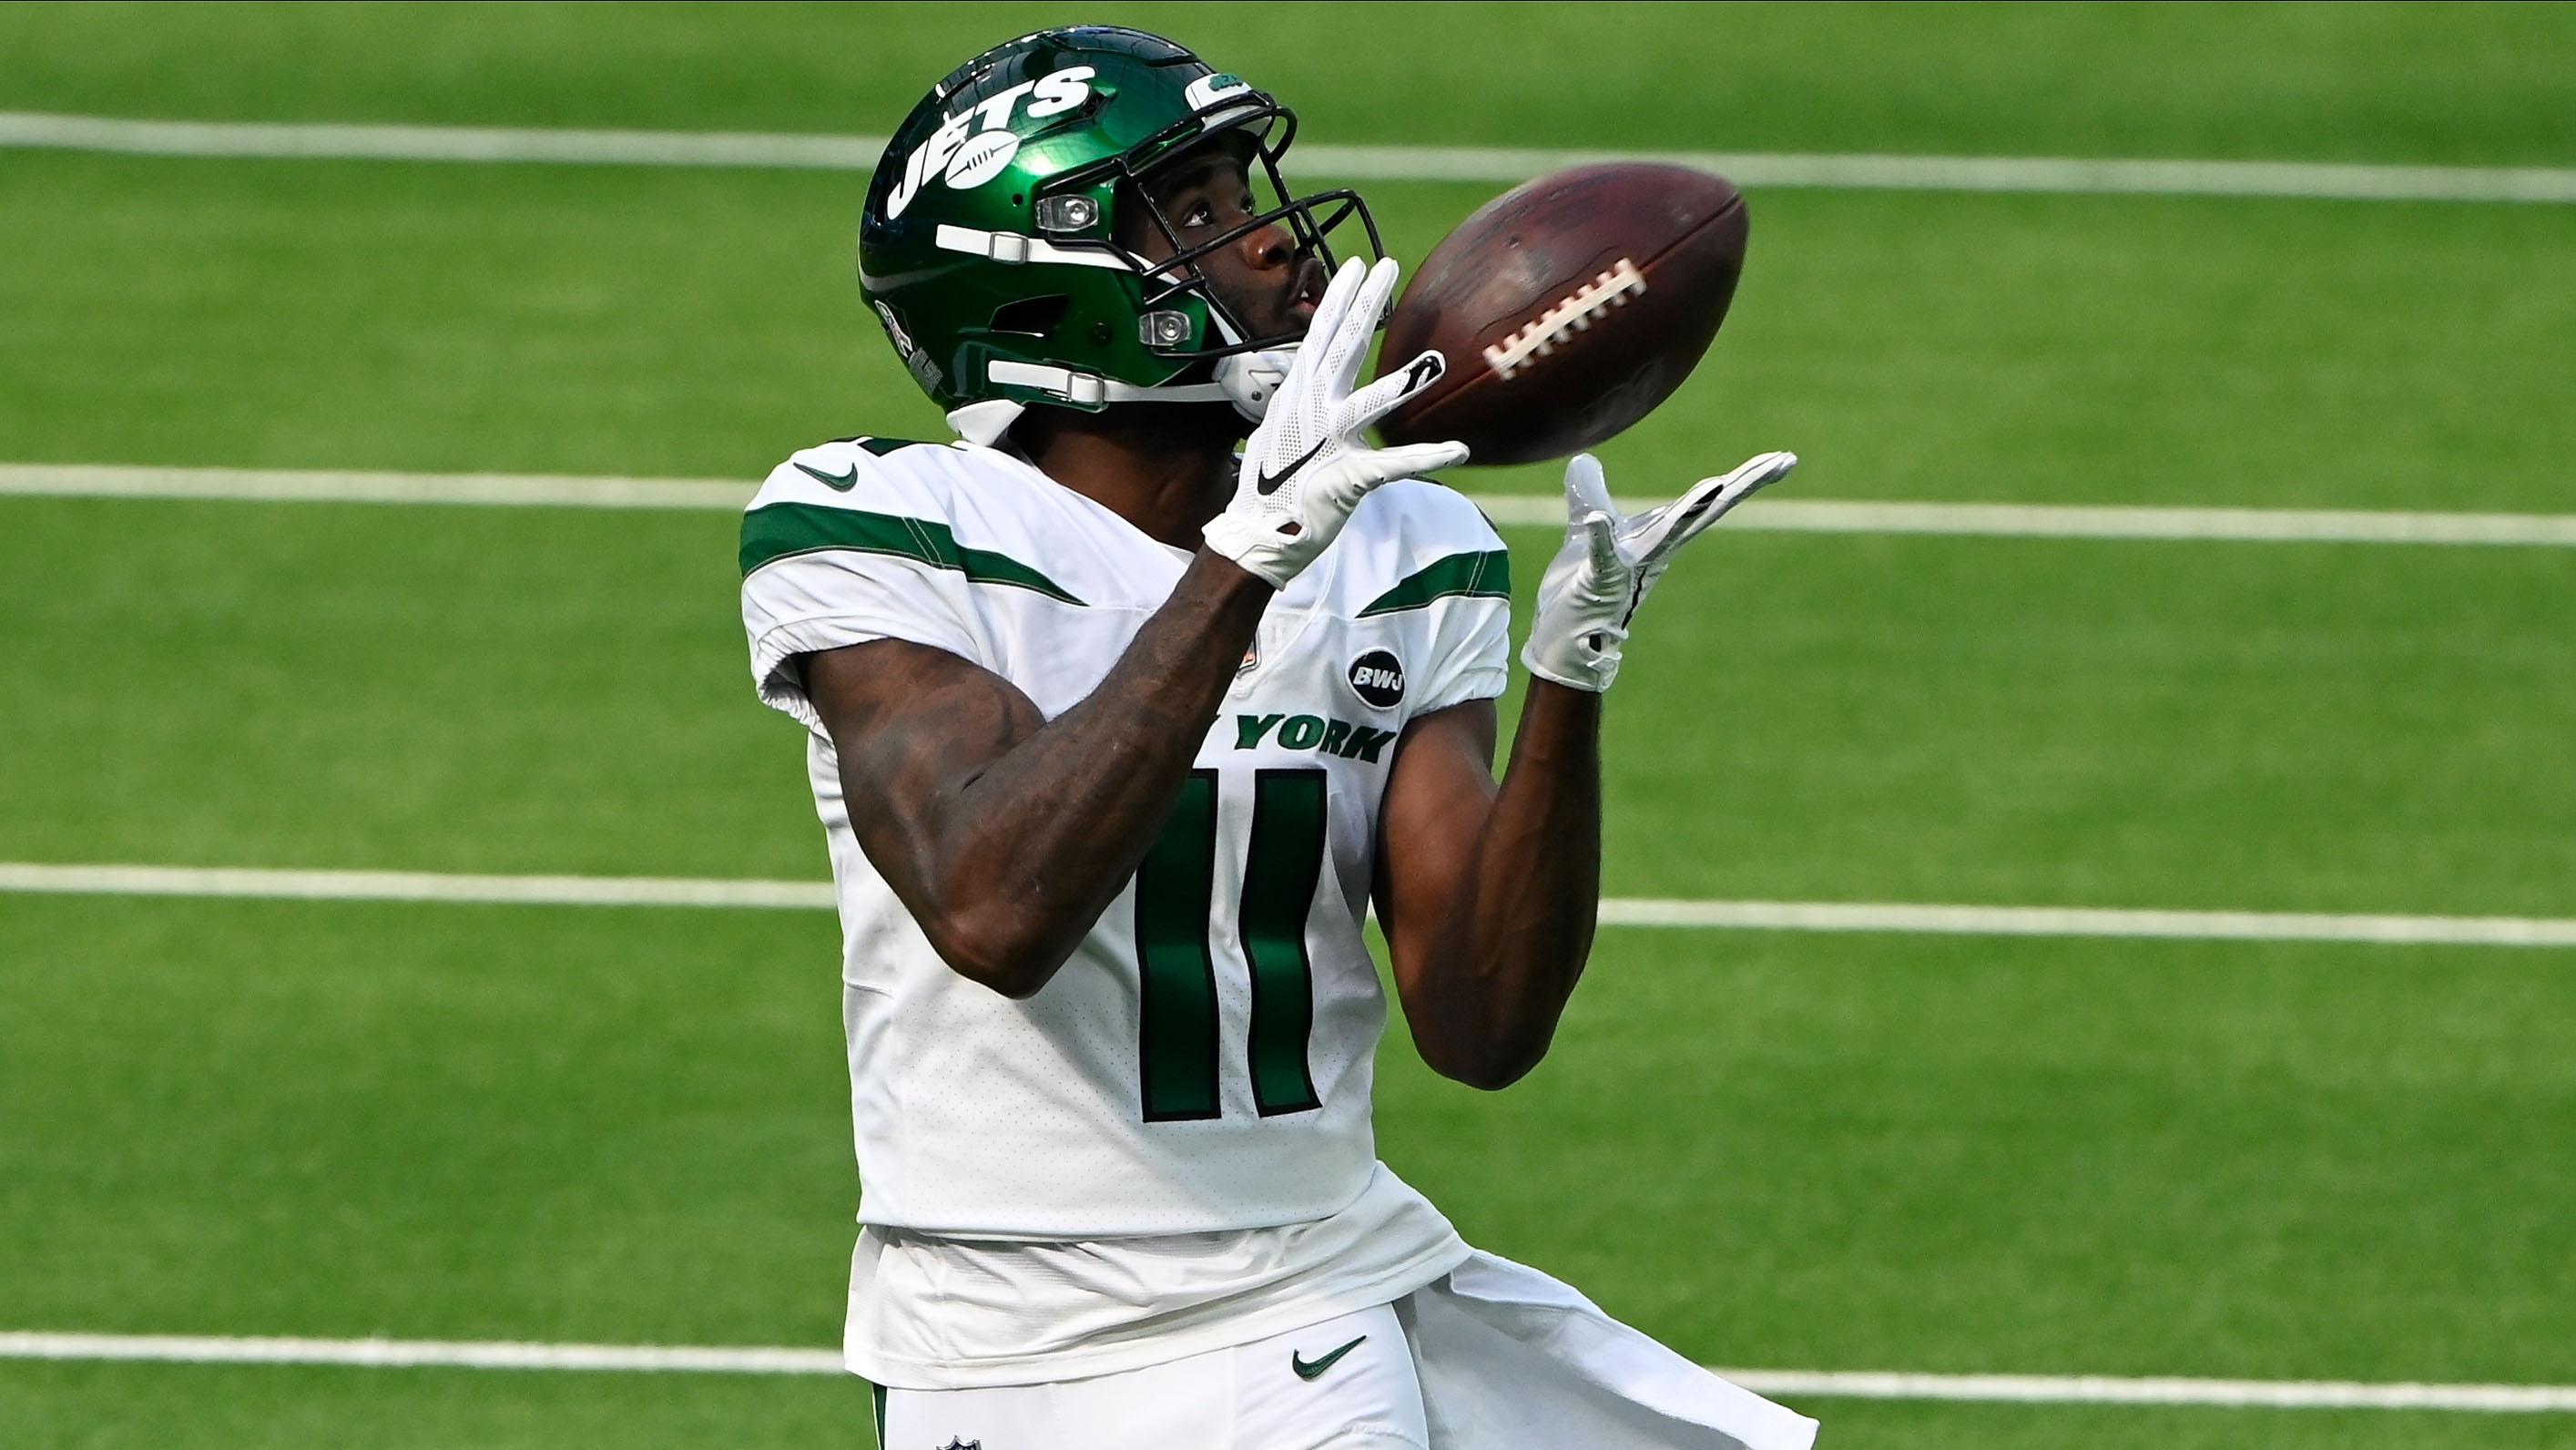 Nov 22, 2020; Inglewood, California, USA; New York Jets wide receiver Denzel Mims (11) makes a catch during pre-game warmups before playing the Los Angeles Chargers at SoFi Stadium. / Robert Hanashiro-USA TODAY Sports